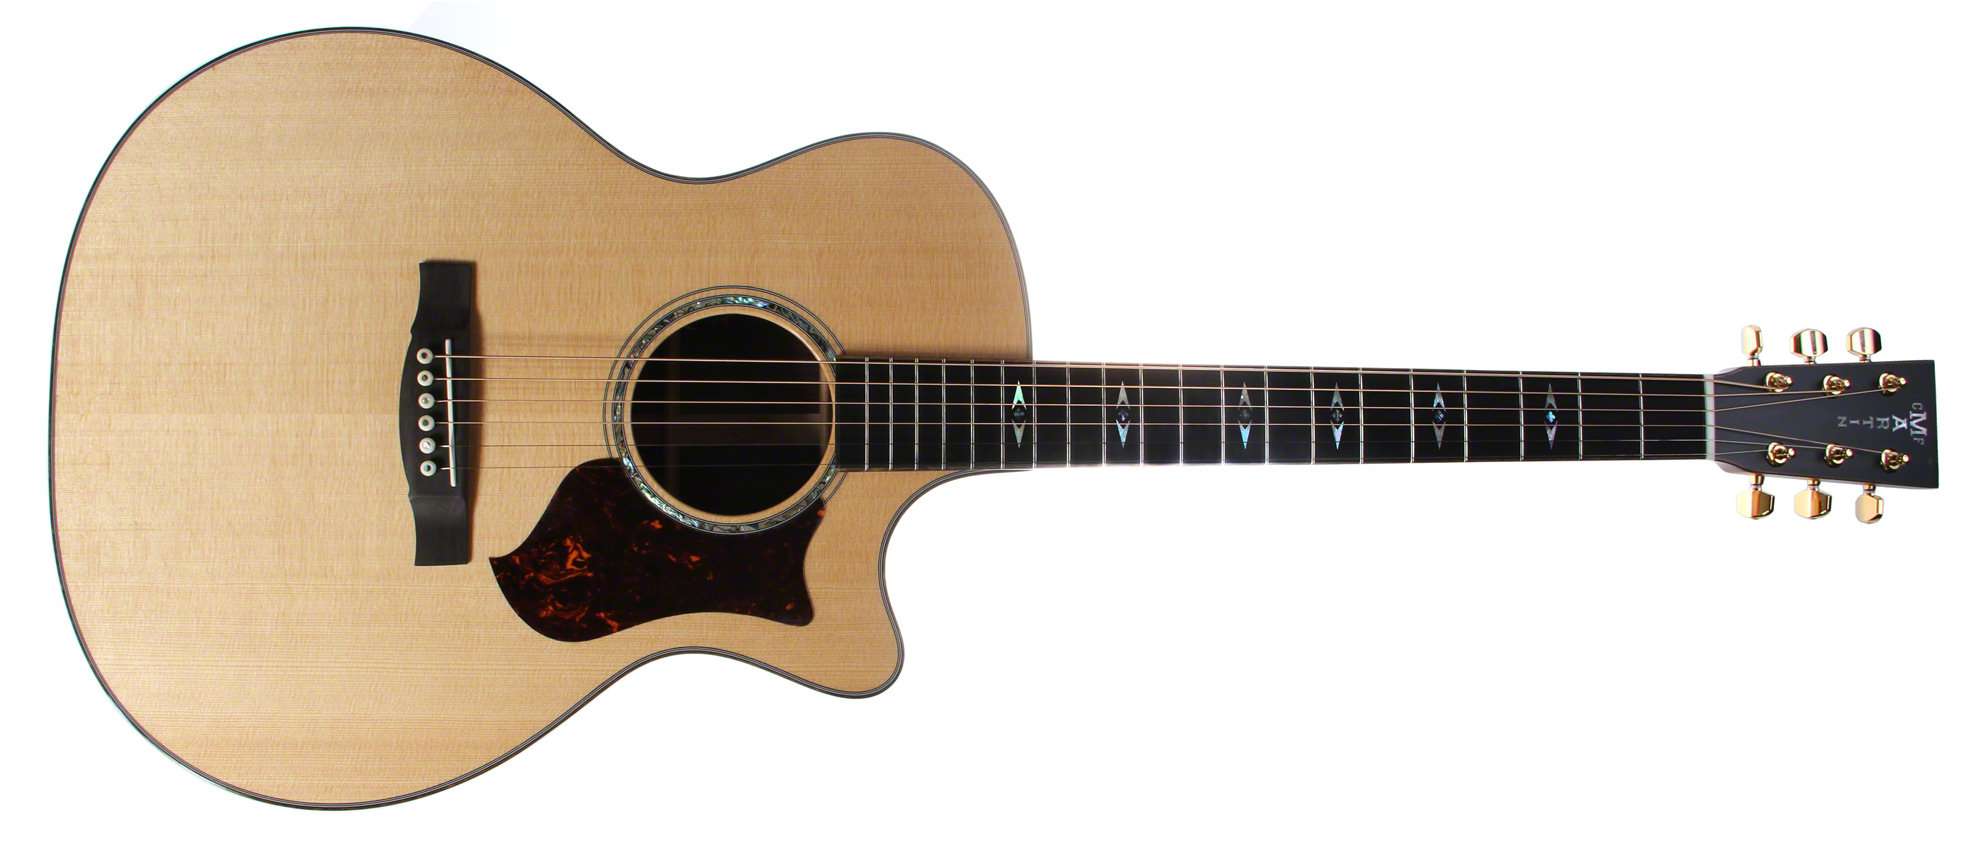 Martin Guitars See Other